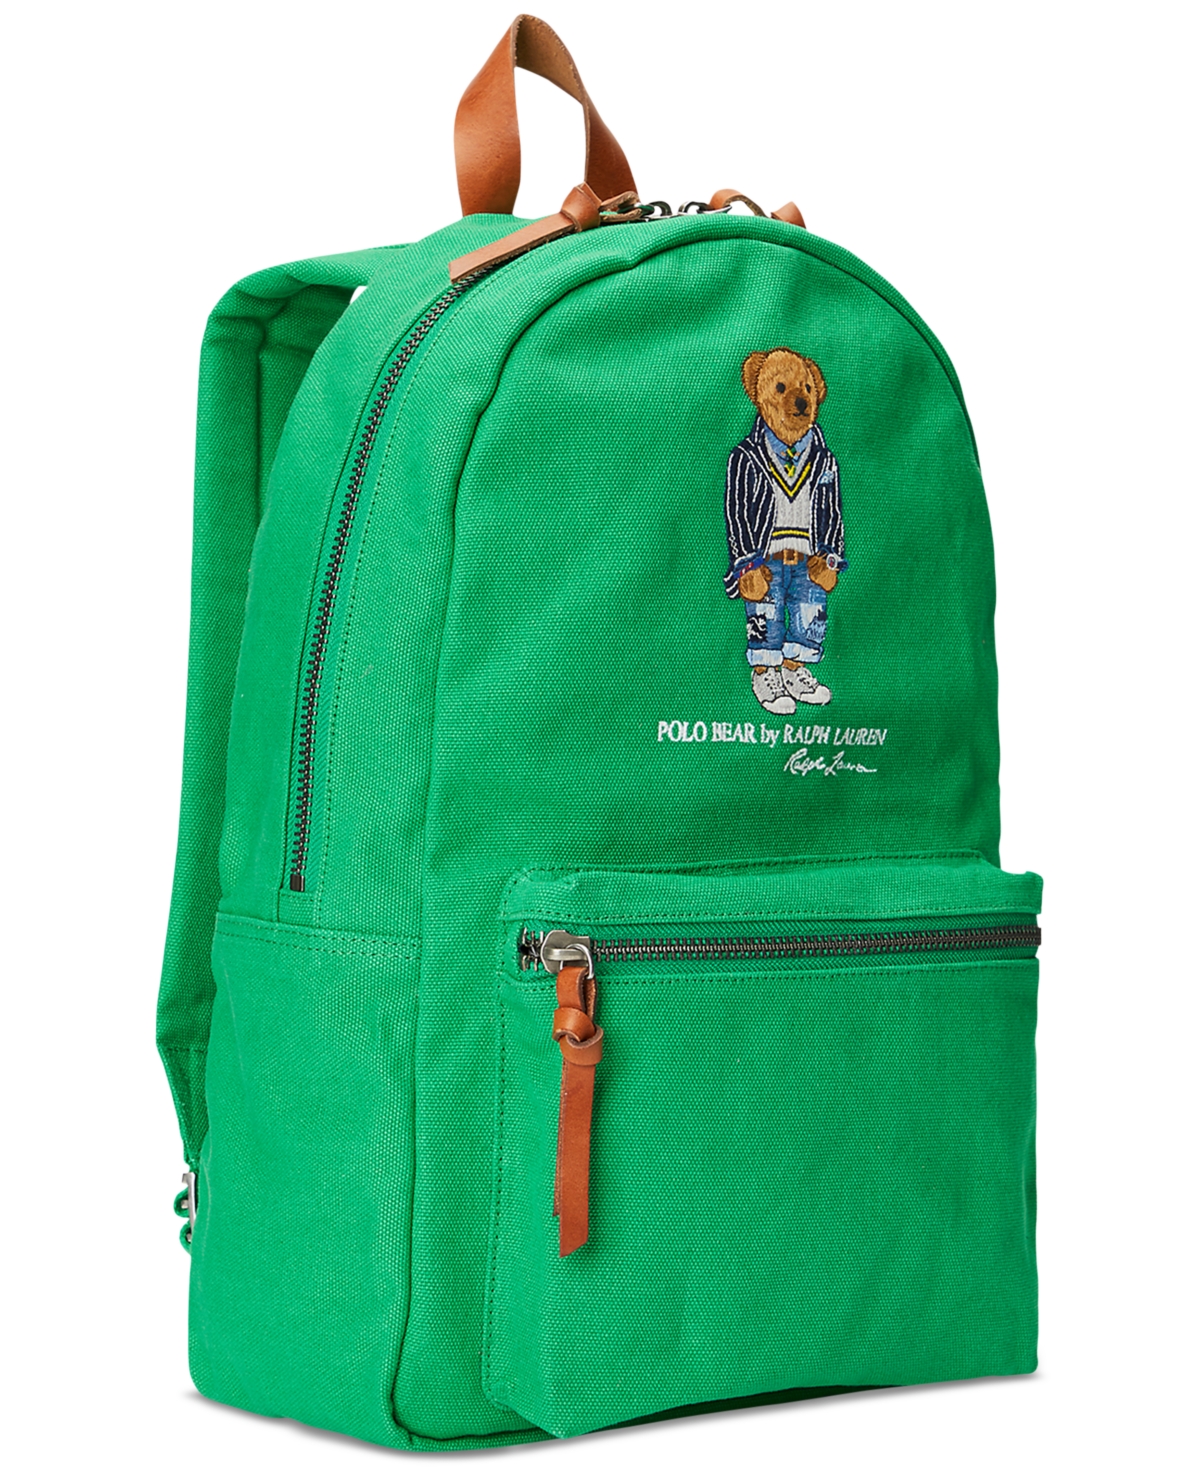 Authentic Ralph Lauren Polo Bear Green Canvas with Leather straps Unisex Bag